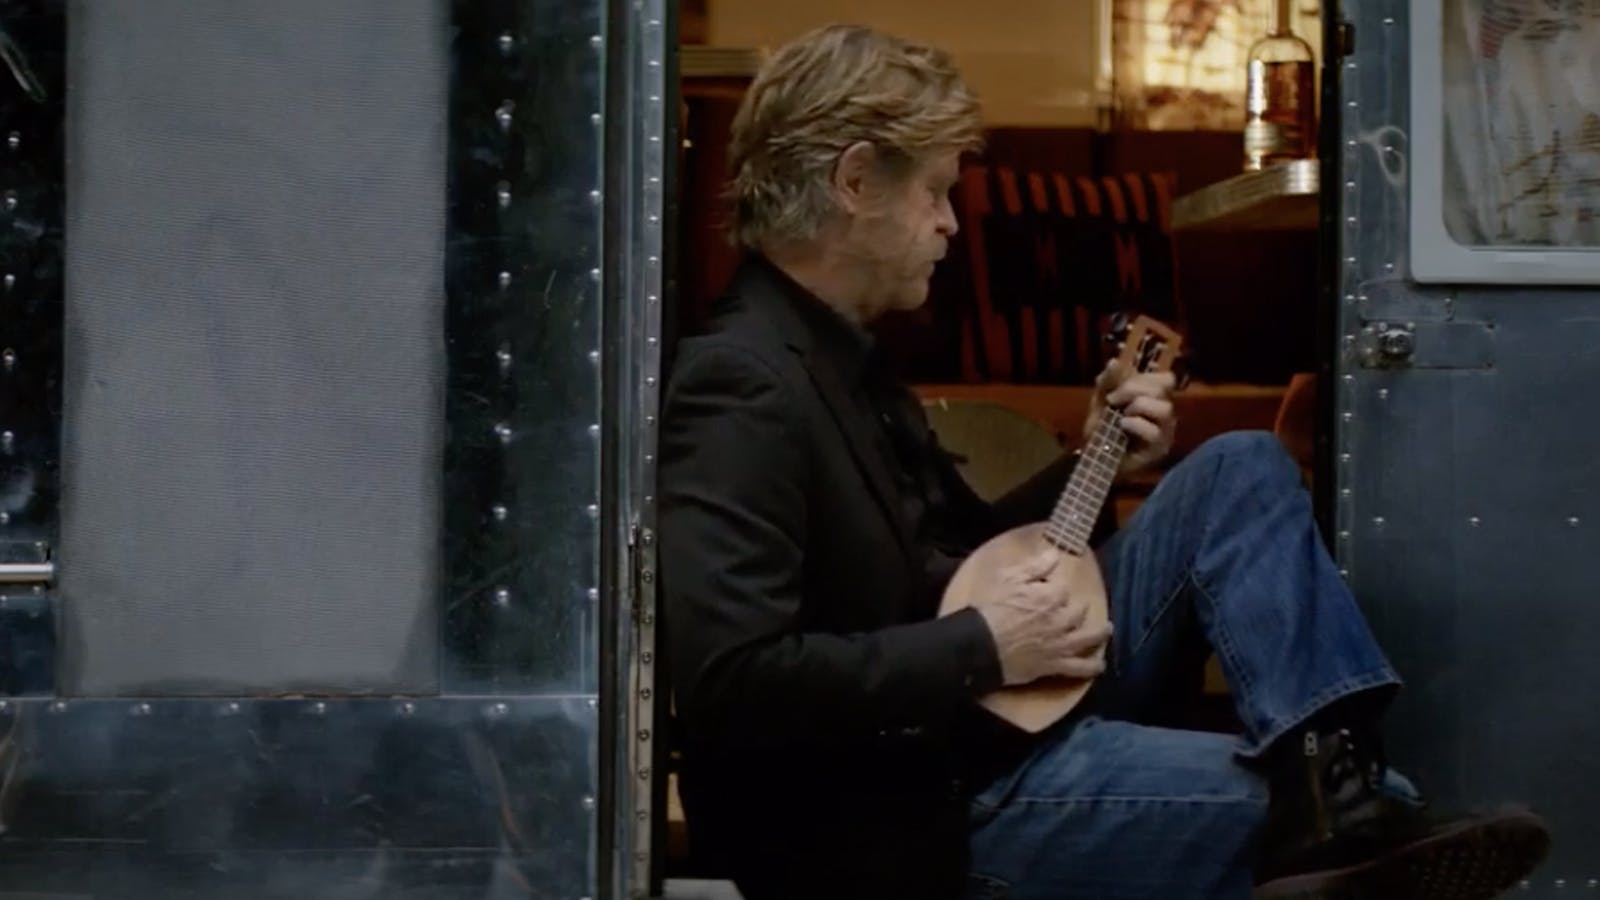 Actor William H. Macy plays the banjo for the Woody Creek campaign.